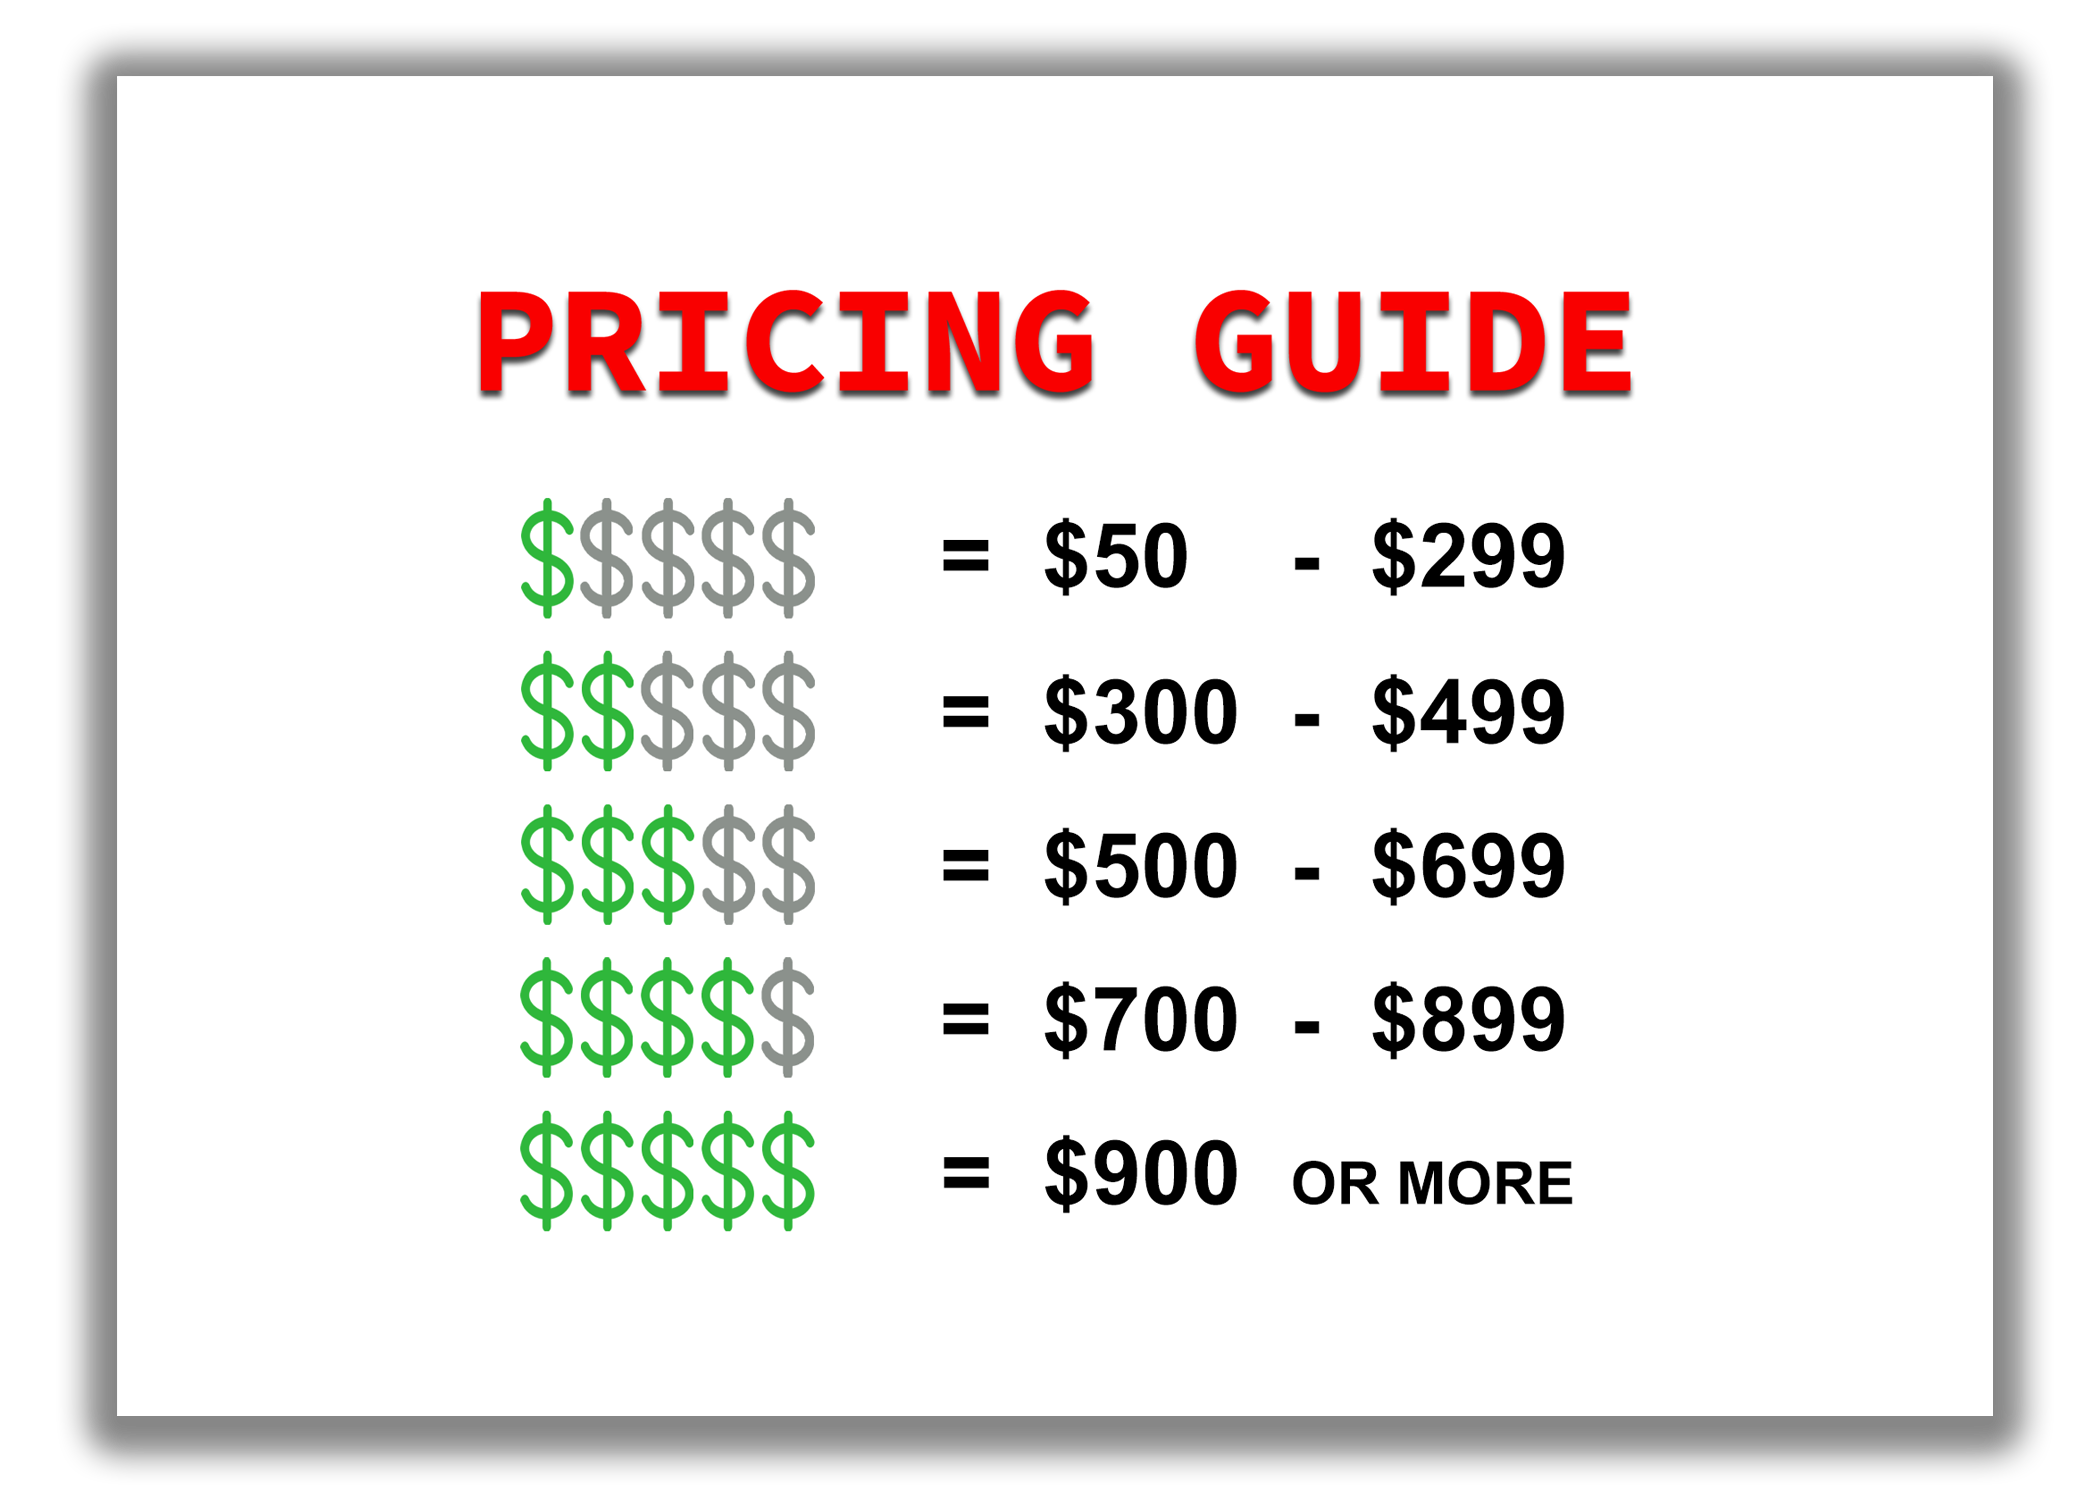 PricingGuide-3Shadow.png